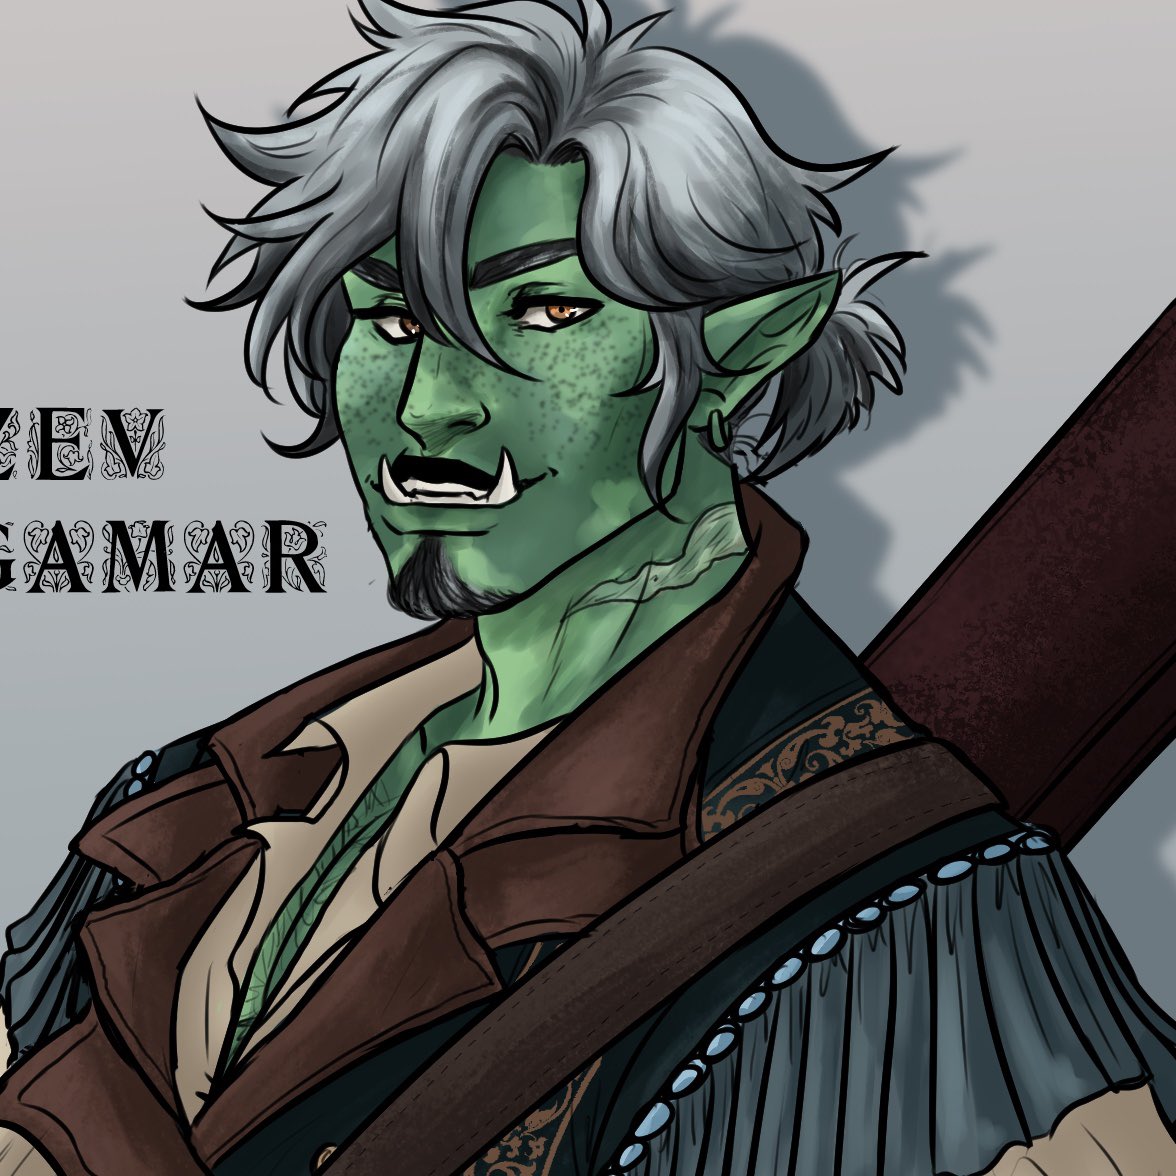 Zev Hagamar, half orc bard. Ex criminal turned wanna be musician. He just wants to spread the magic of music and holds his freedom above everything else